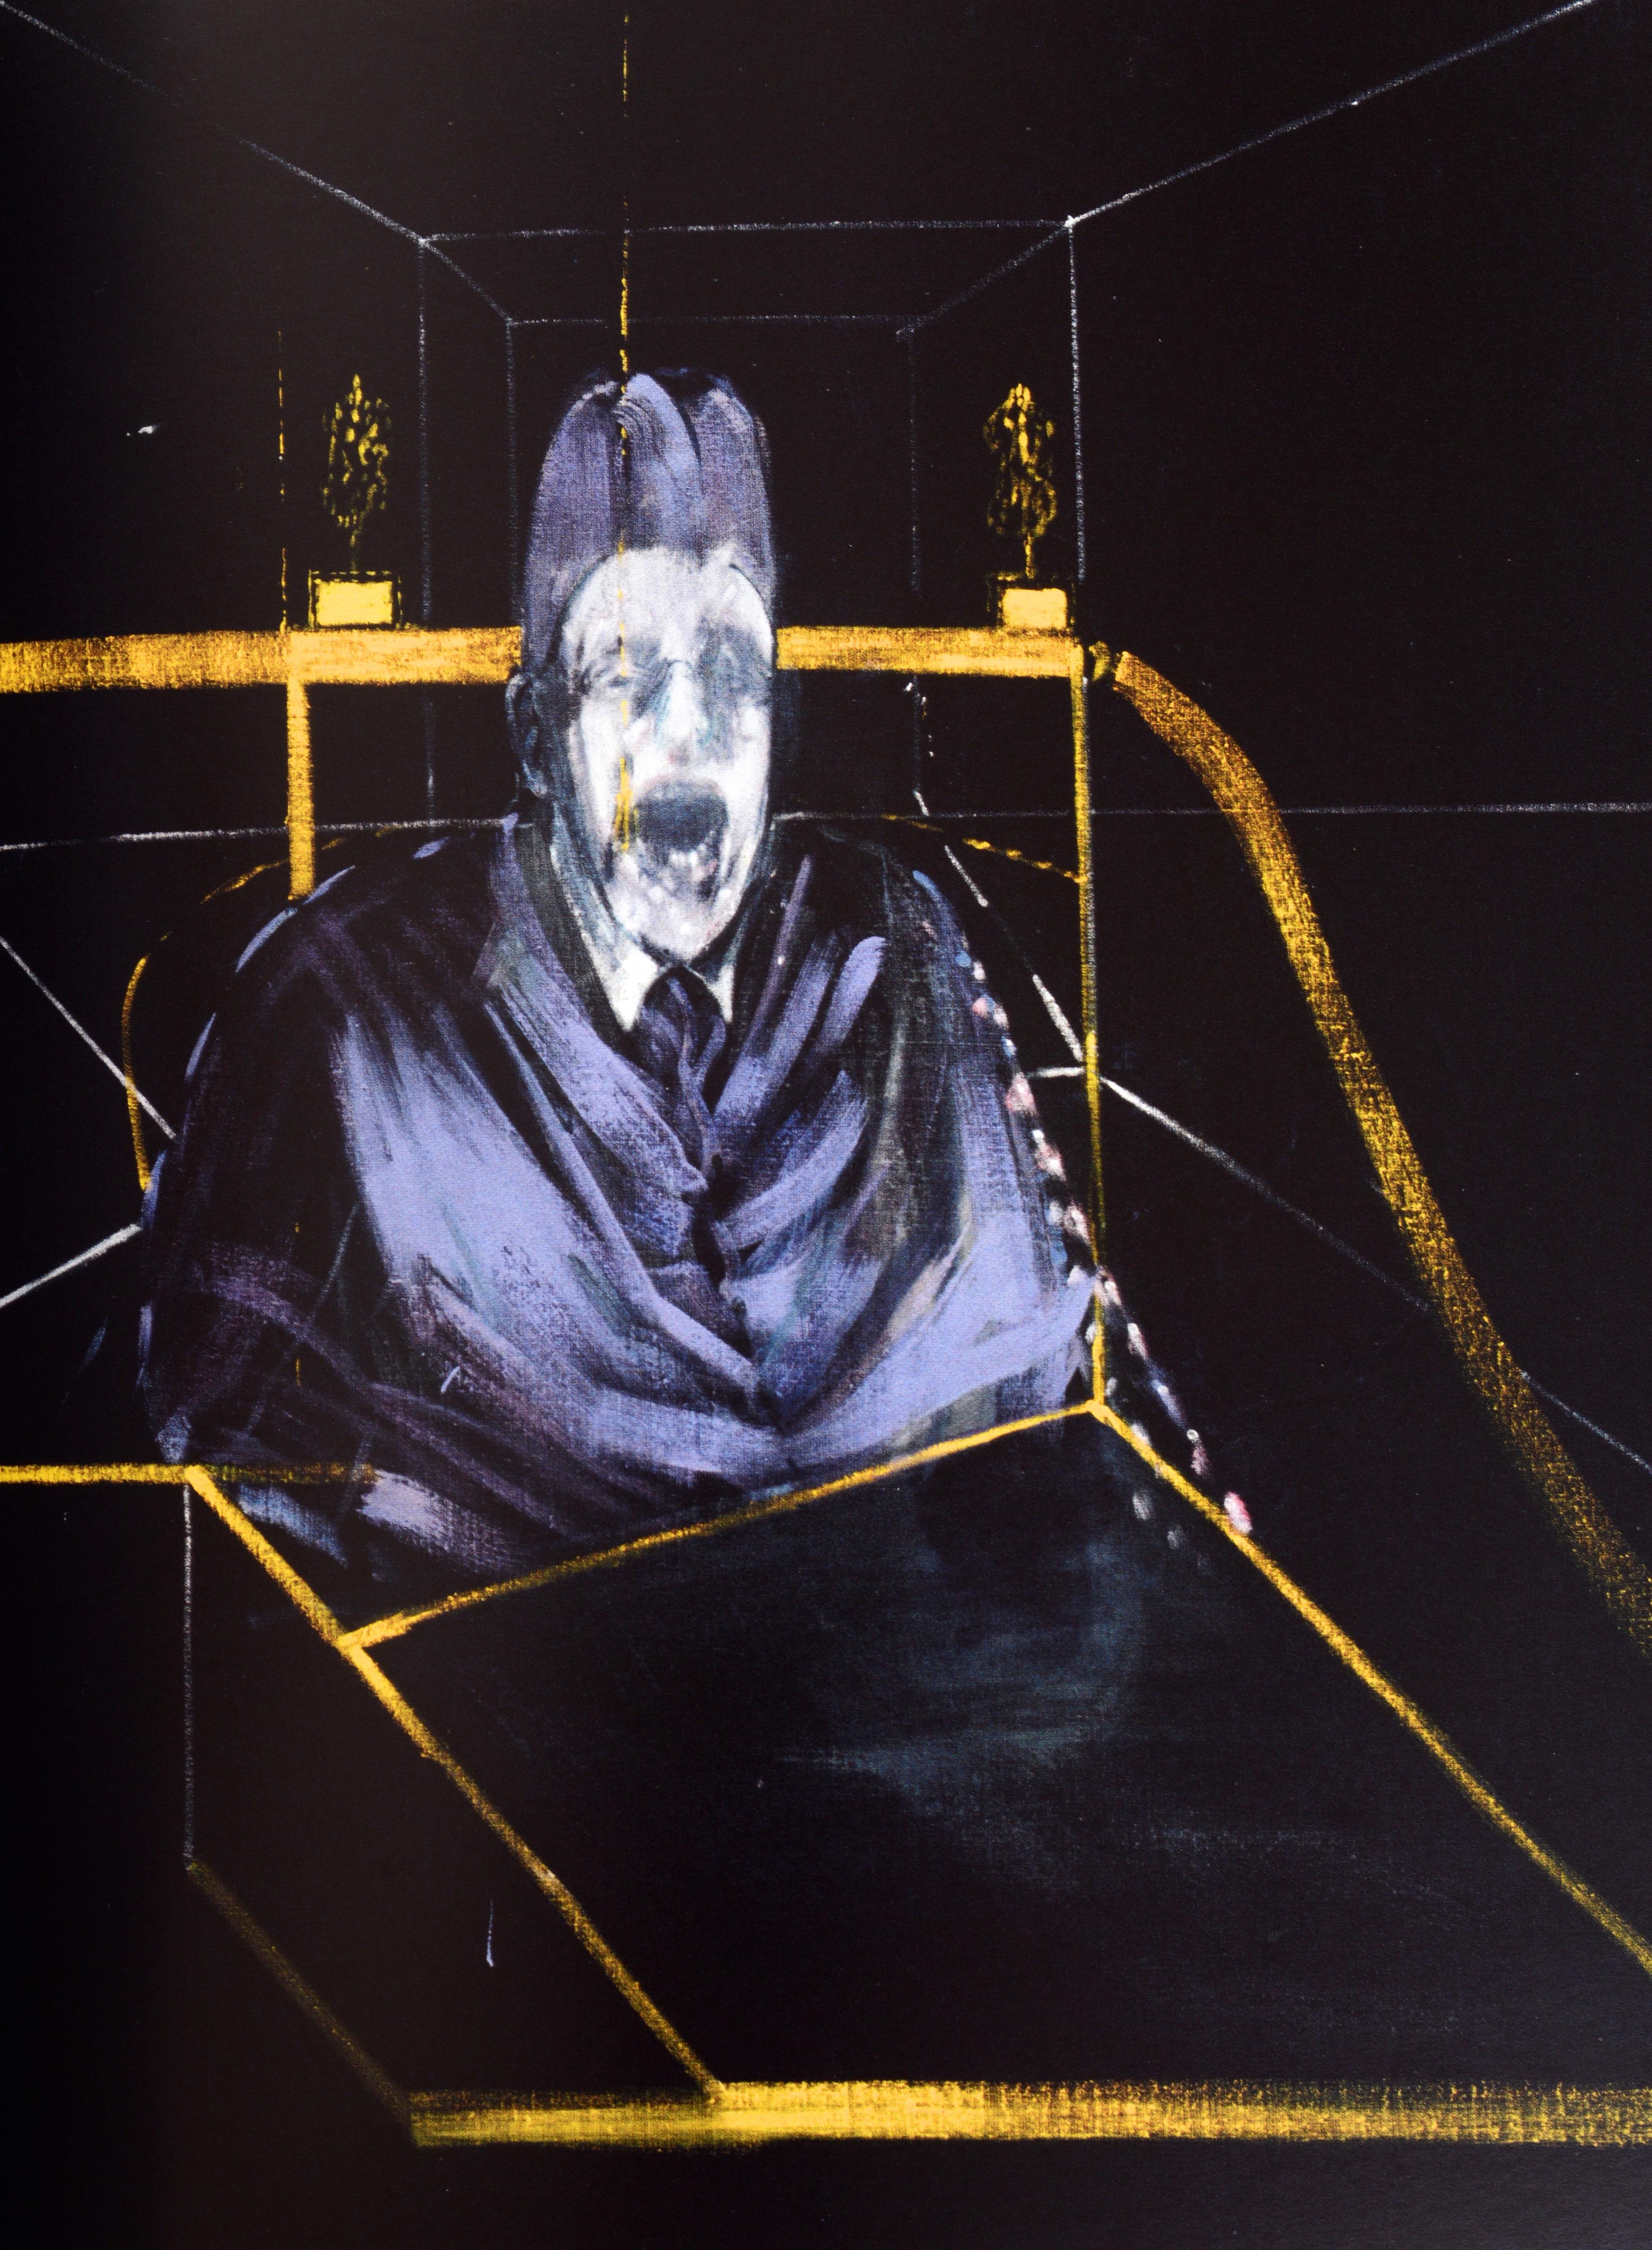 Paper Christie's FRANCIS BACON SEATED FIGURE 1960 1st Ed For Sale